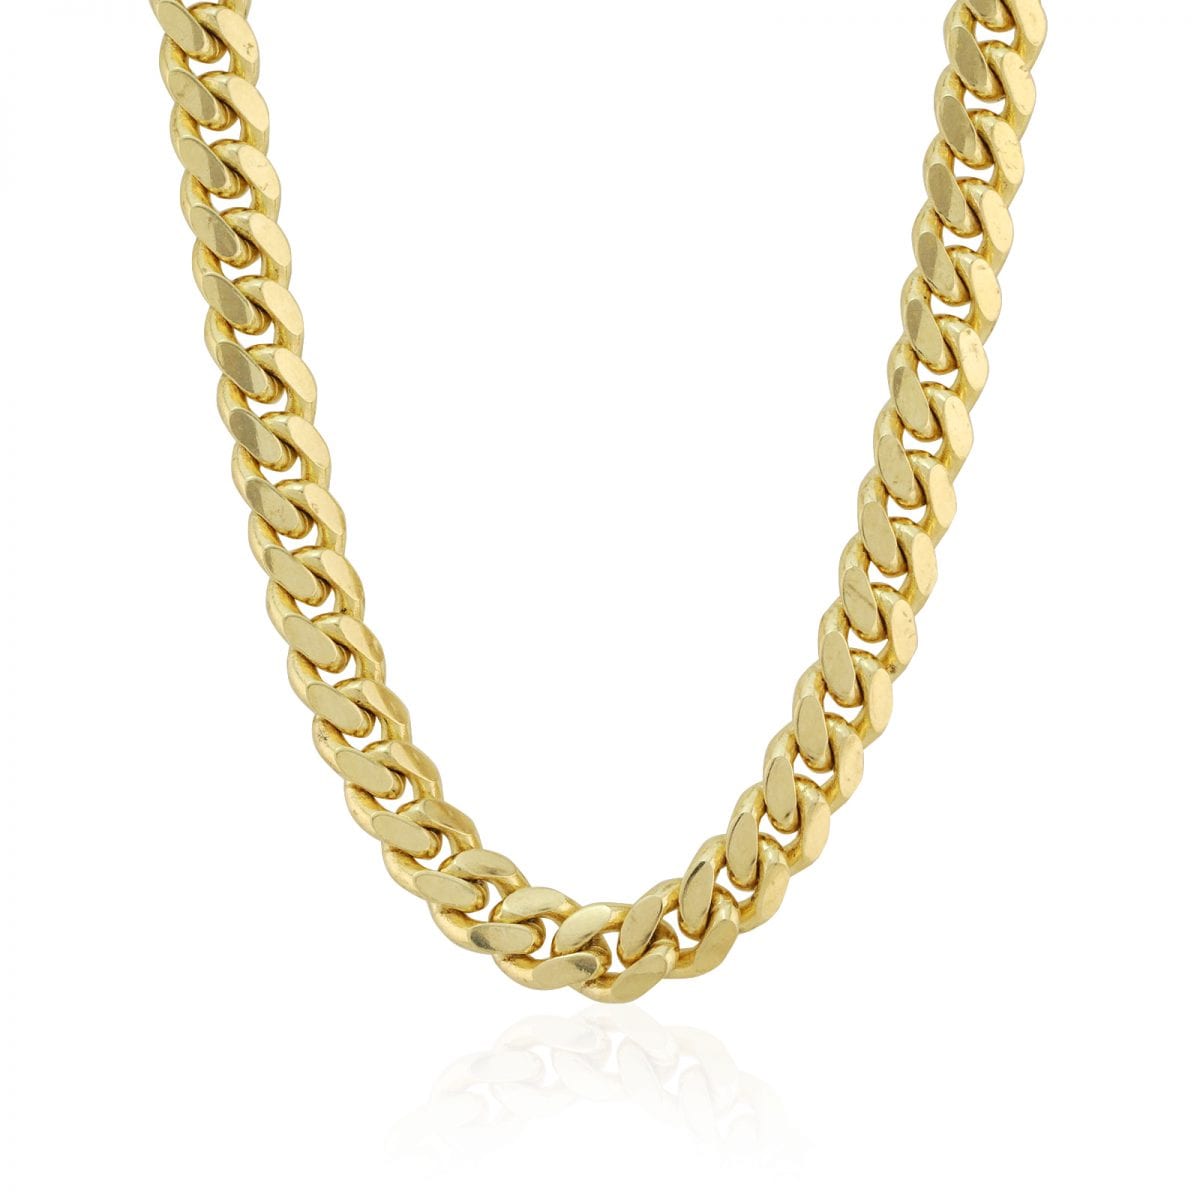 Solid 14k Yellow Gold 2-6mm Miami Cuban Chain Necklace 18"-28" - 5mm, 26"